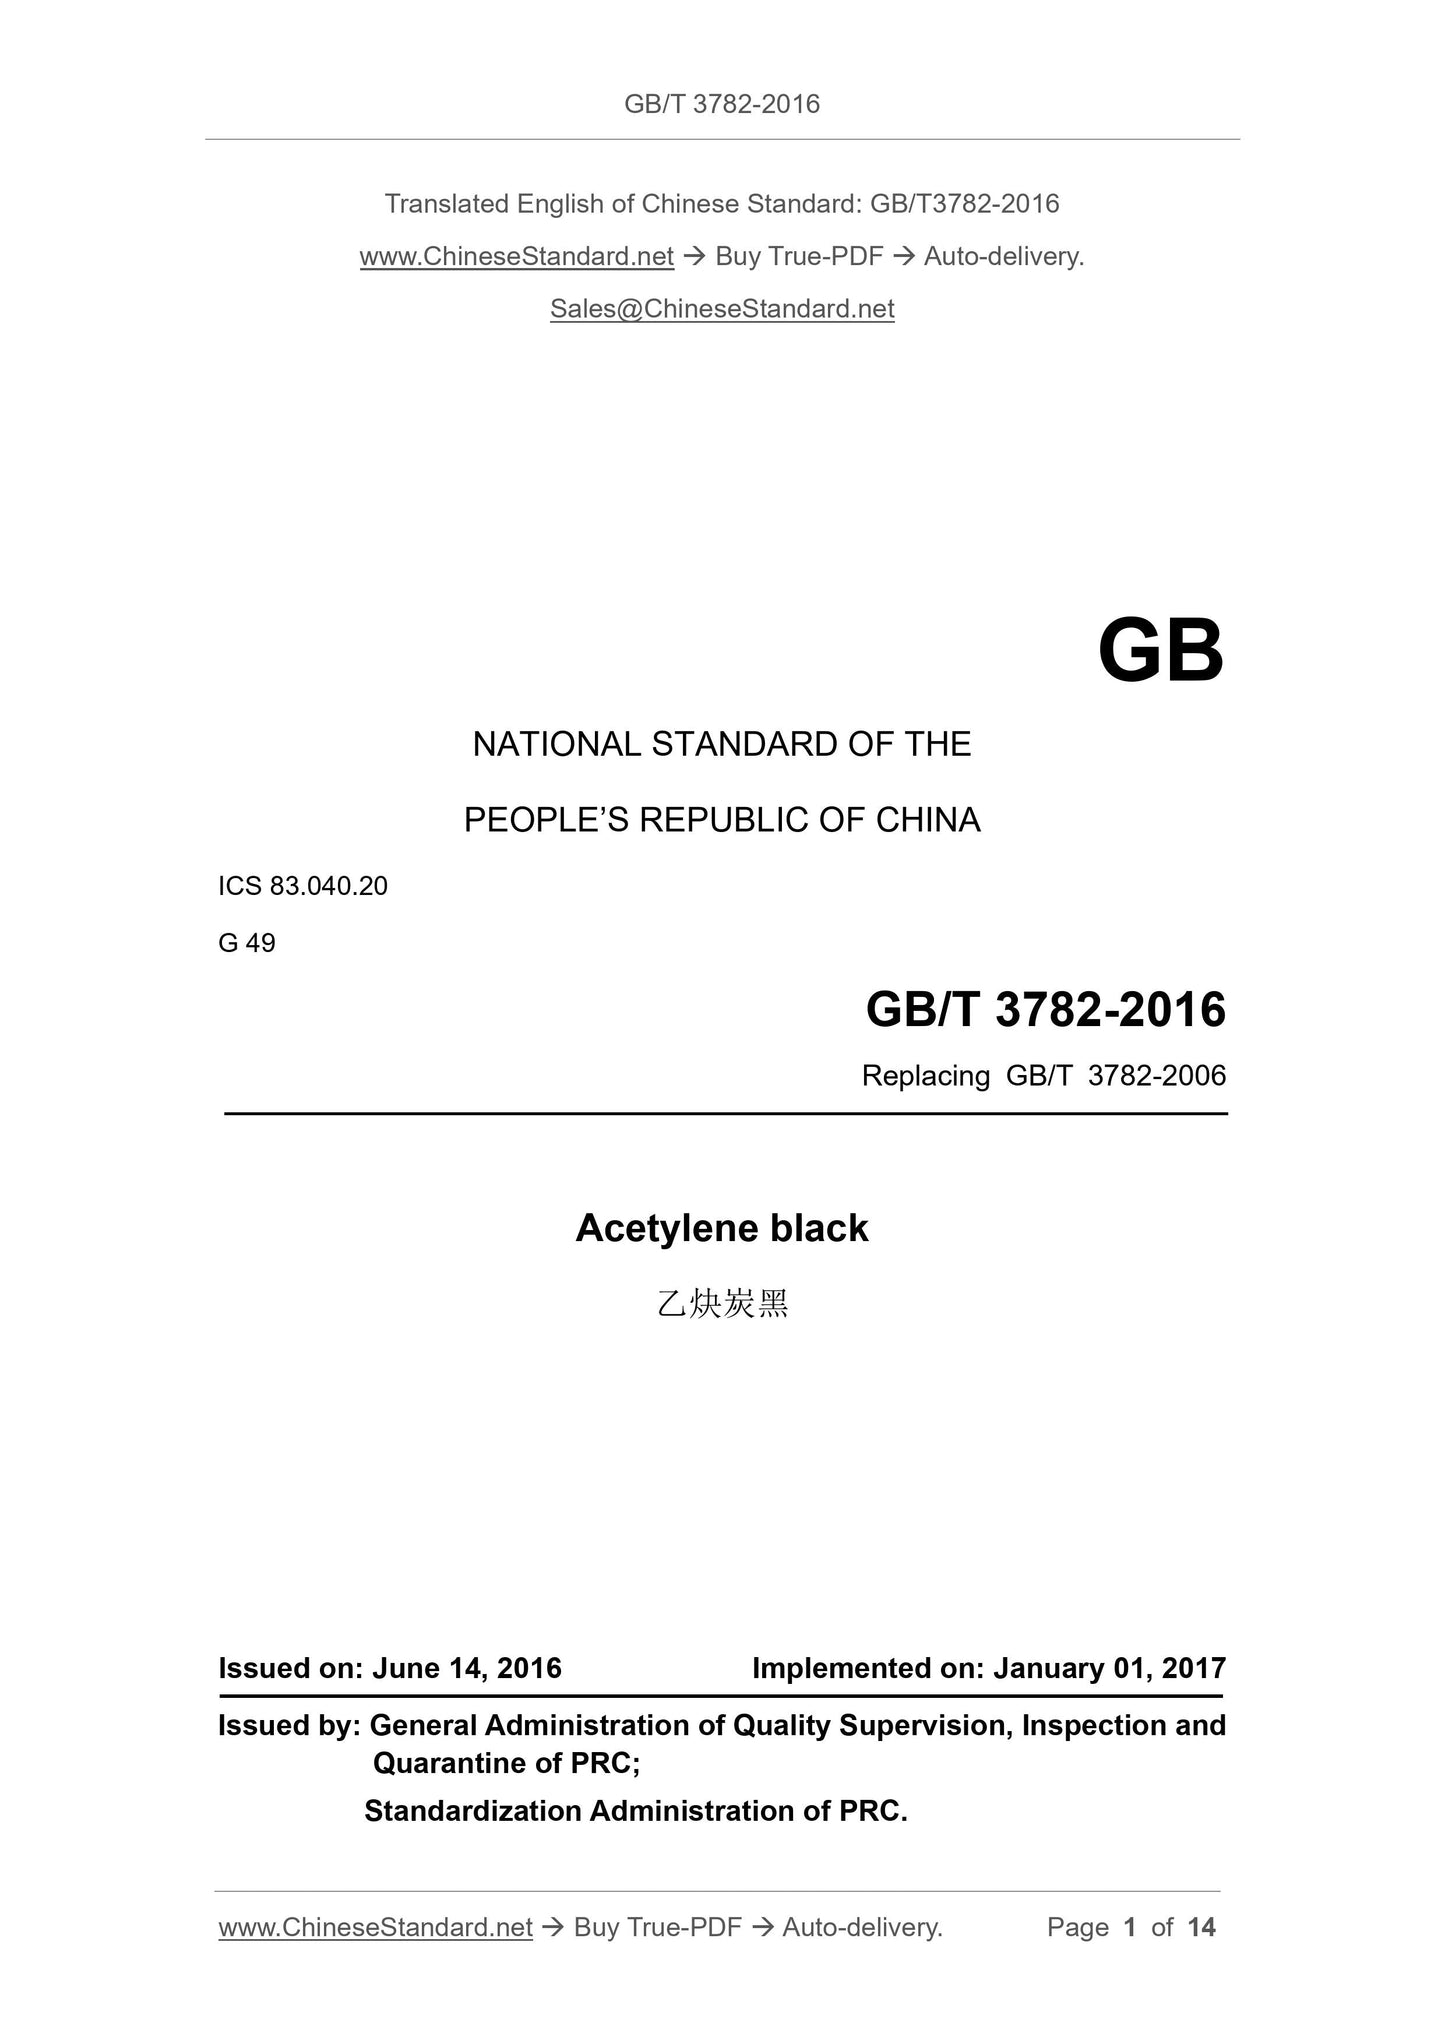 GB/T 3782-2016 Page 1